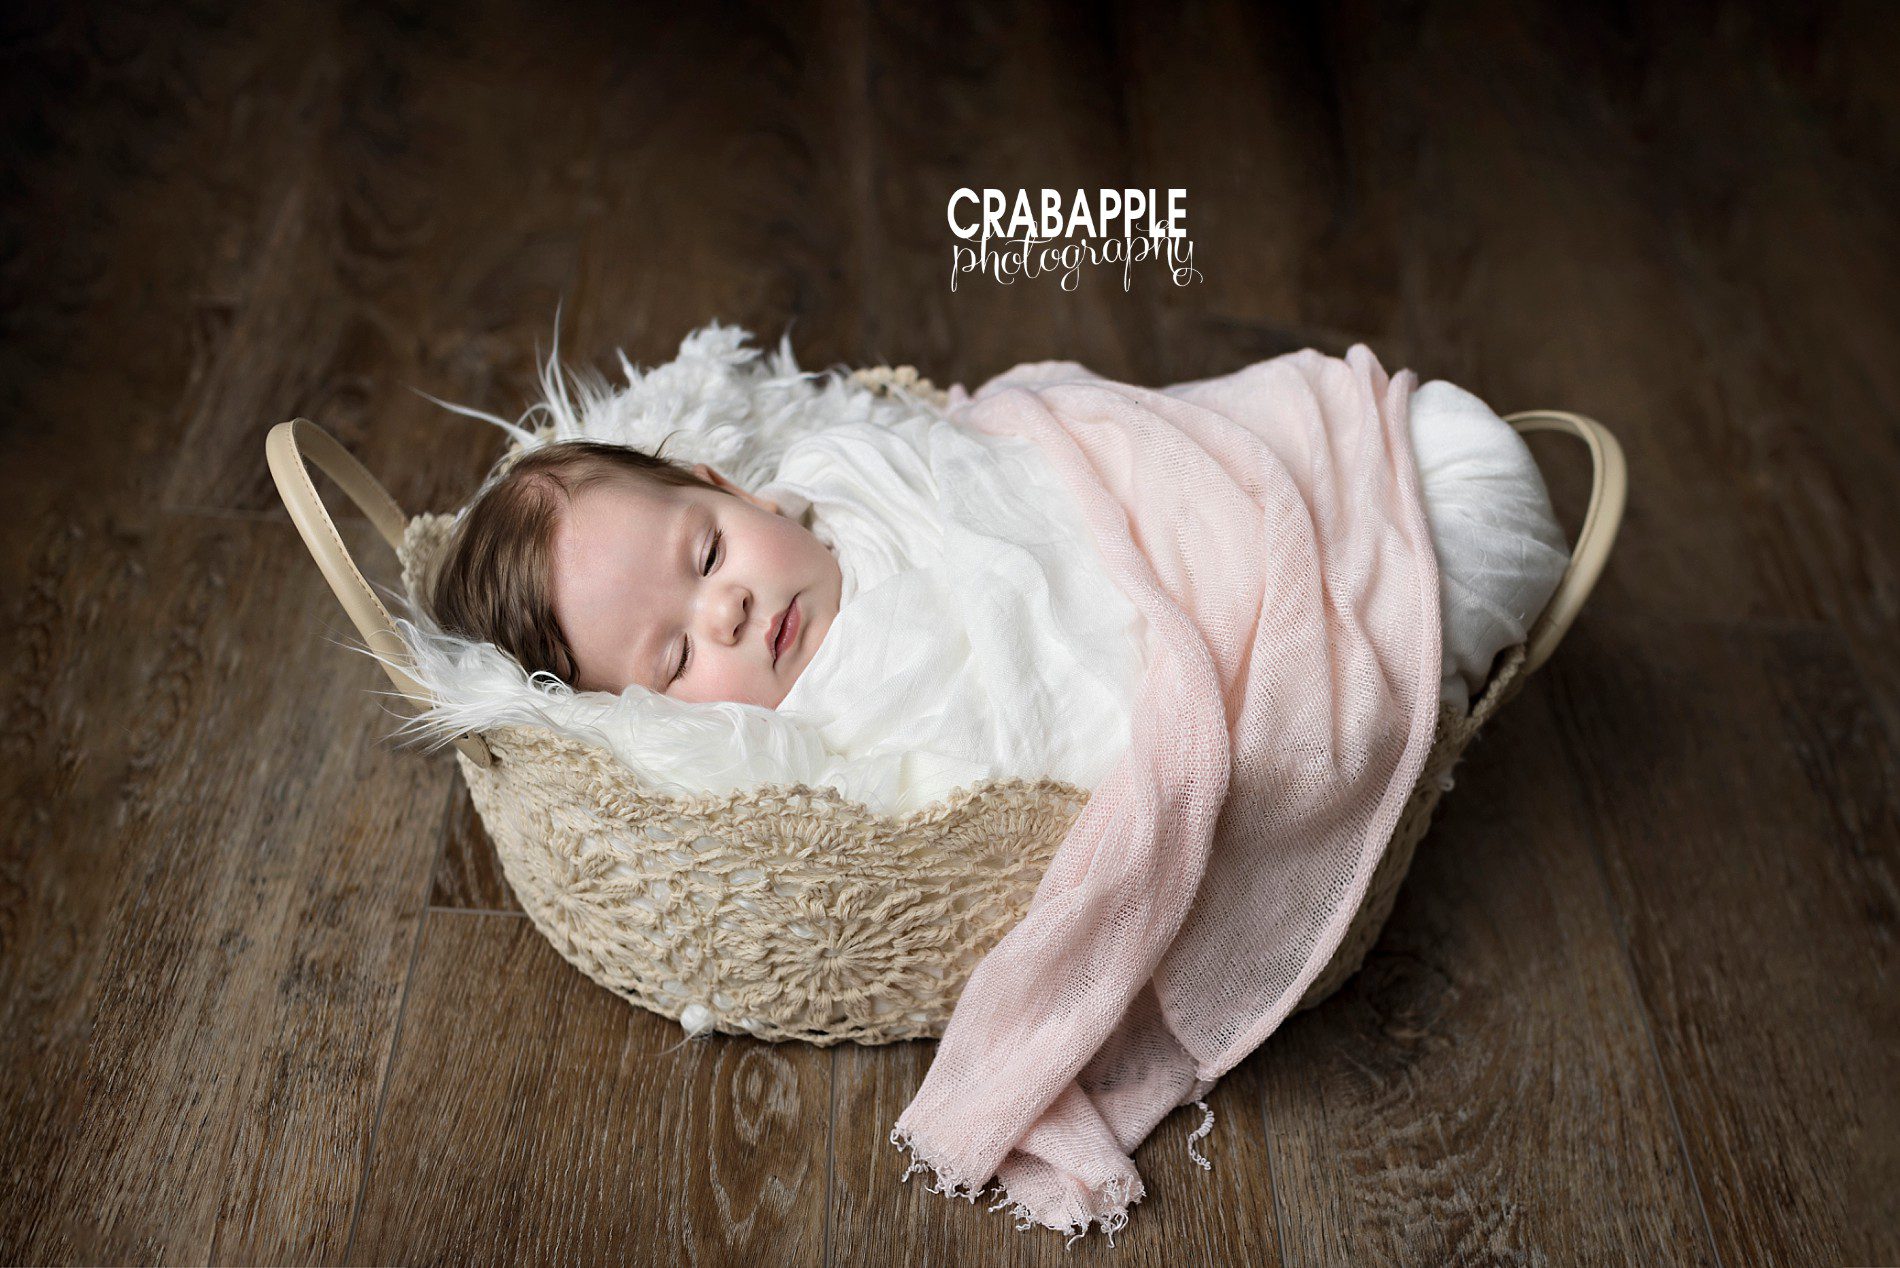 Swaddled baby photos 6 months old